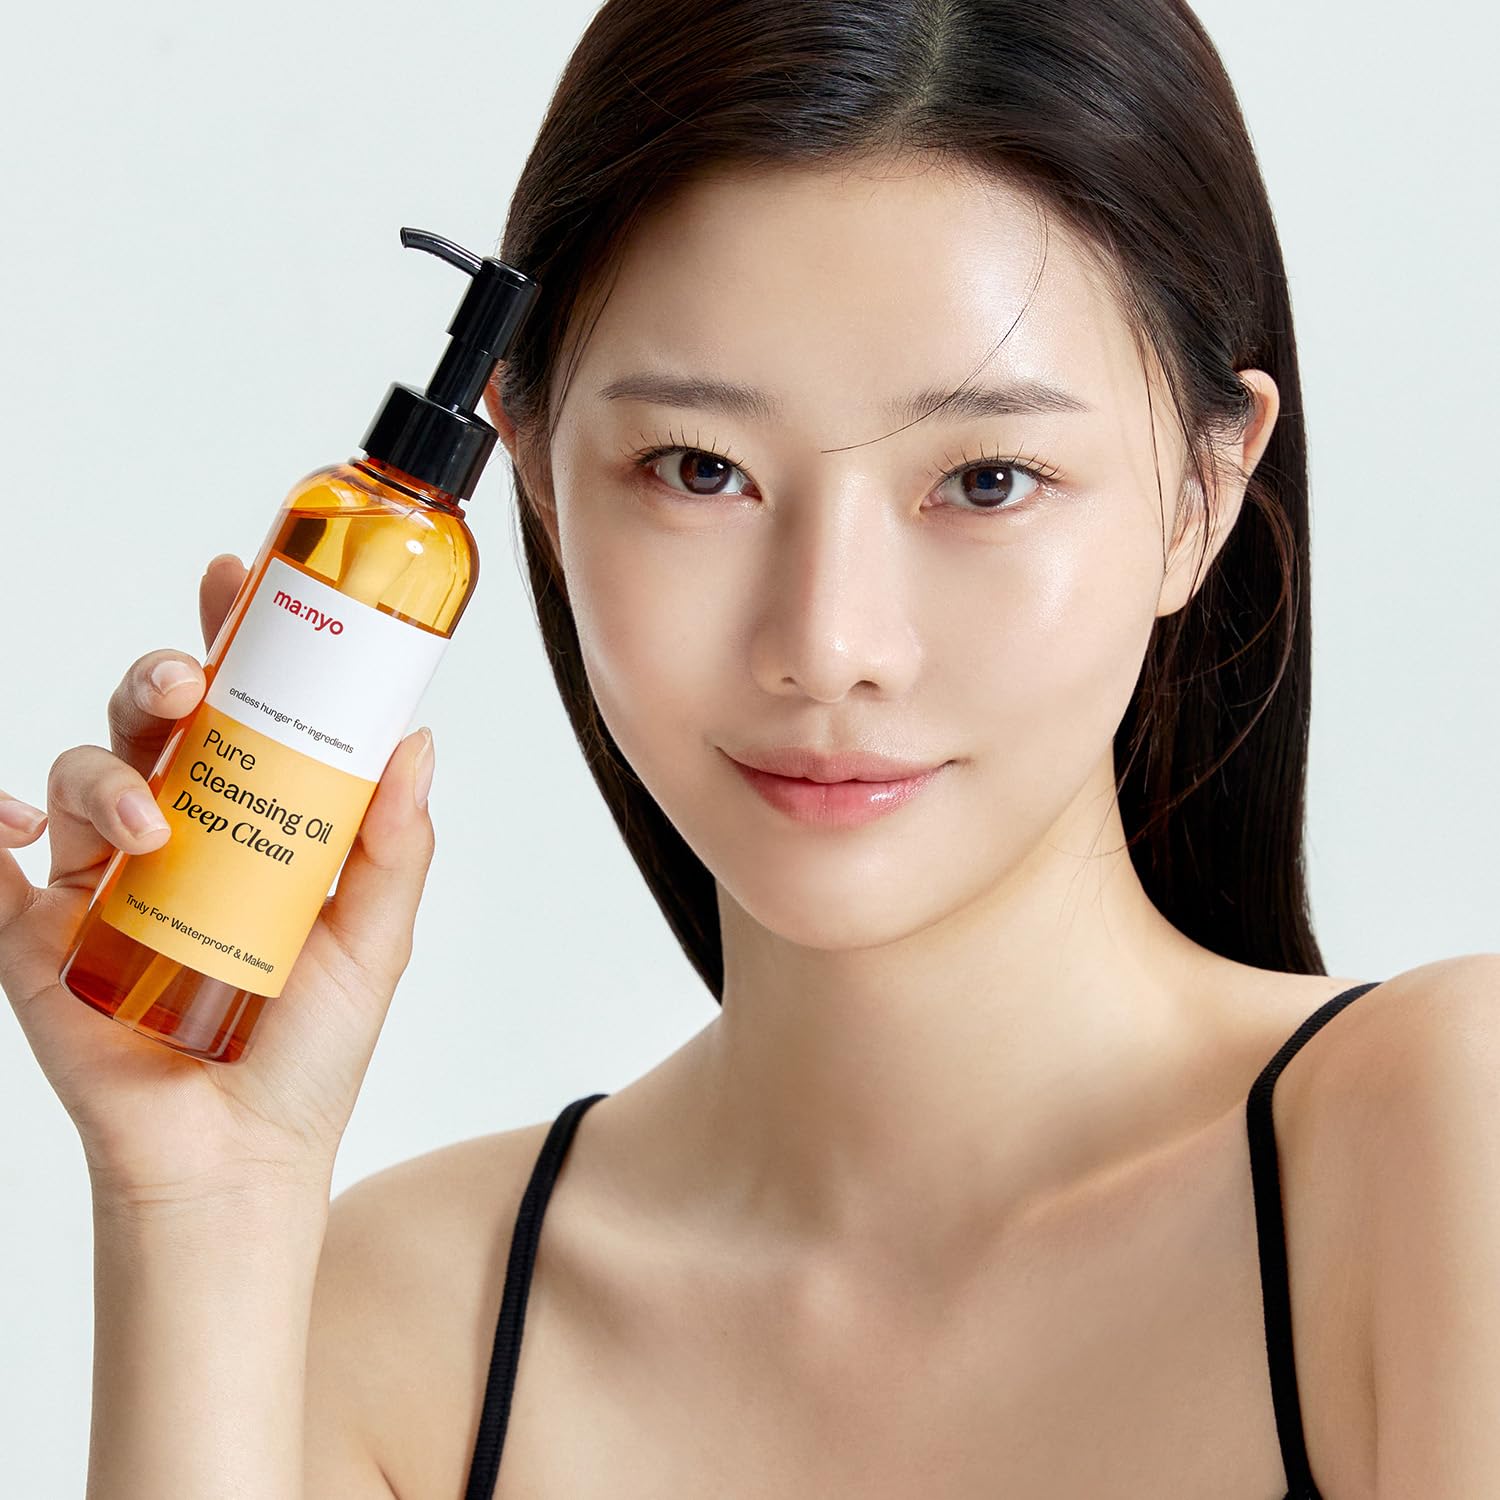 Manyo Factory Pure Cleansing Oil Deep Clean